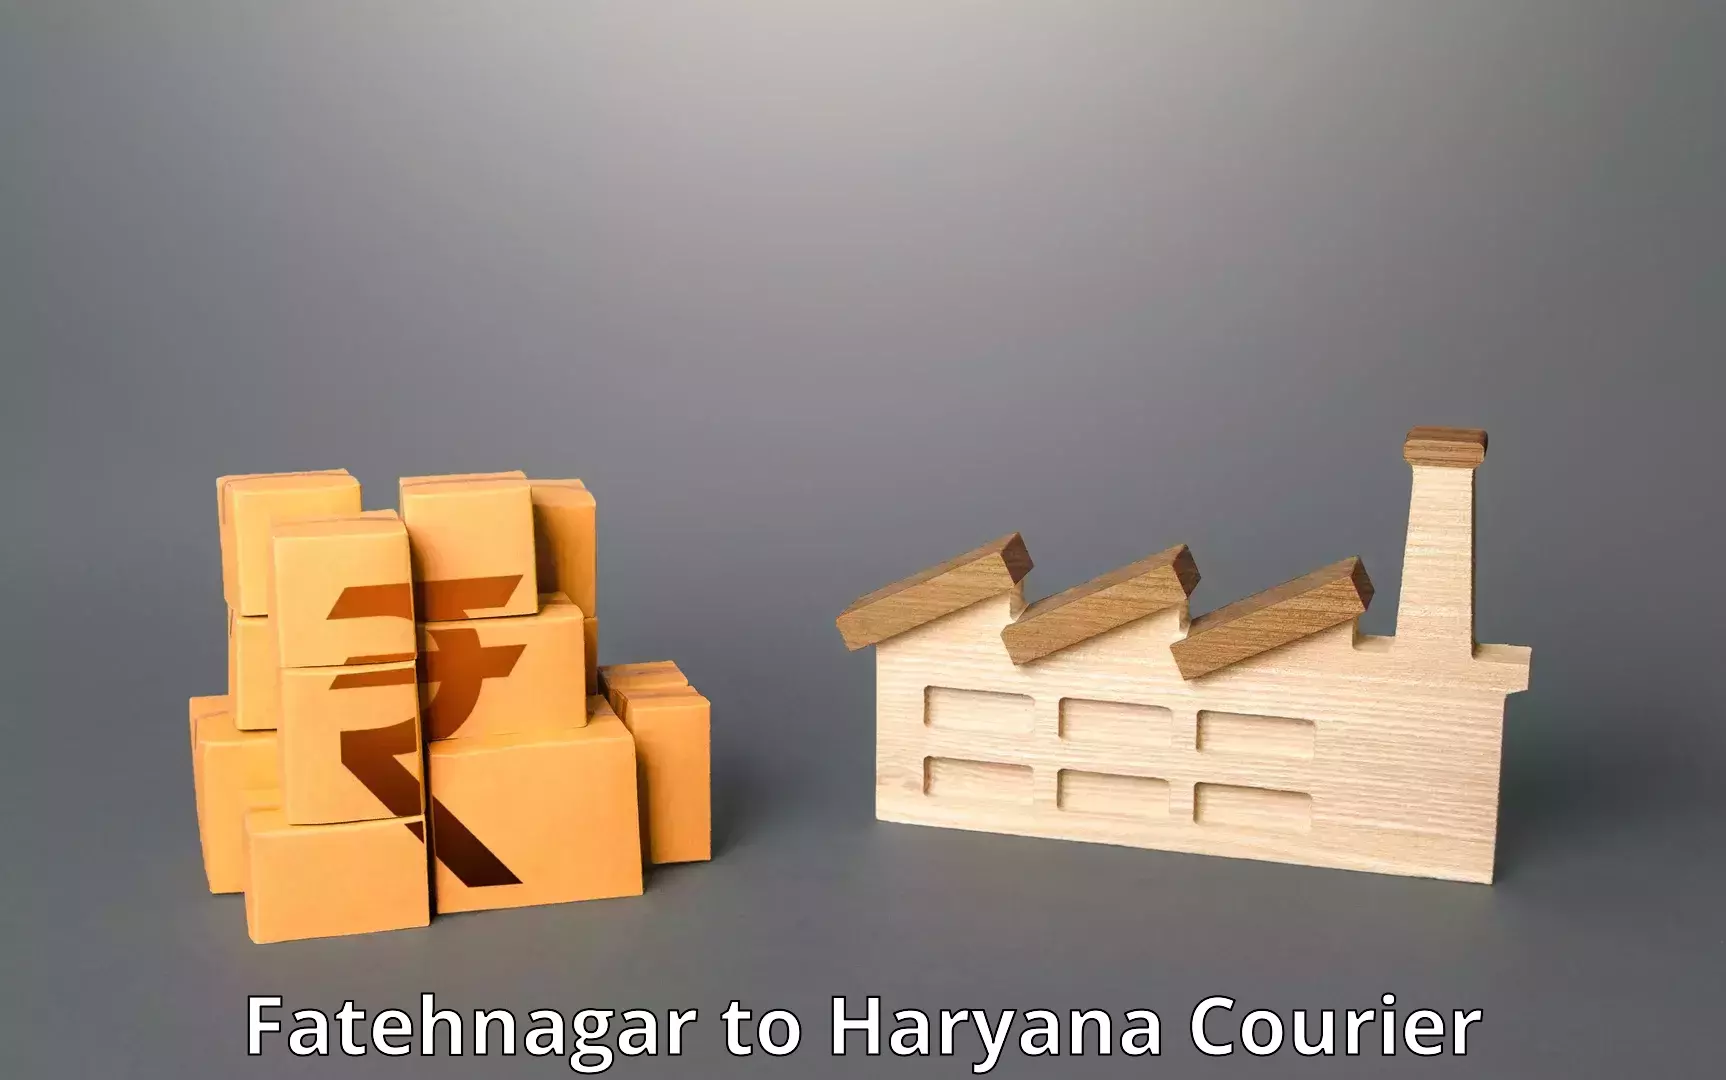 Weekend courier service Fatehnagar to Chaudhary Charan Singh Haryana Agricultural University Hisar